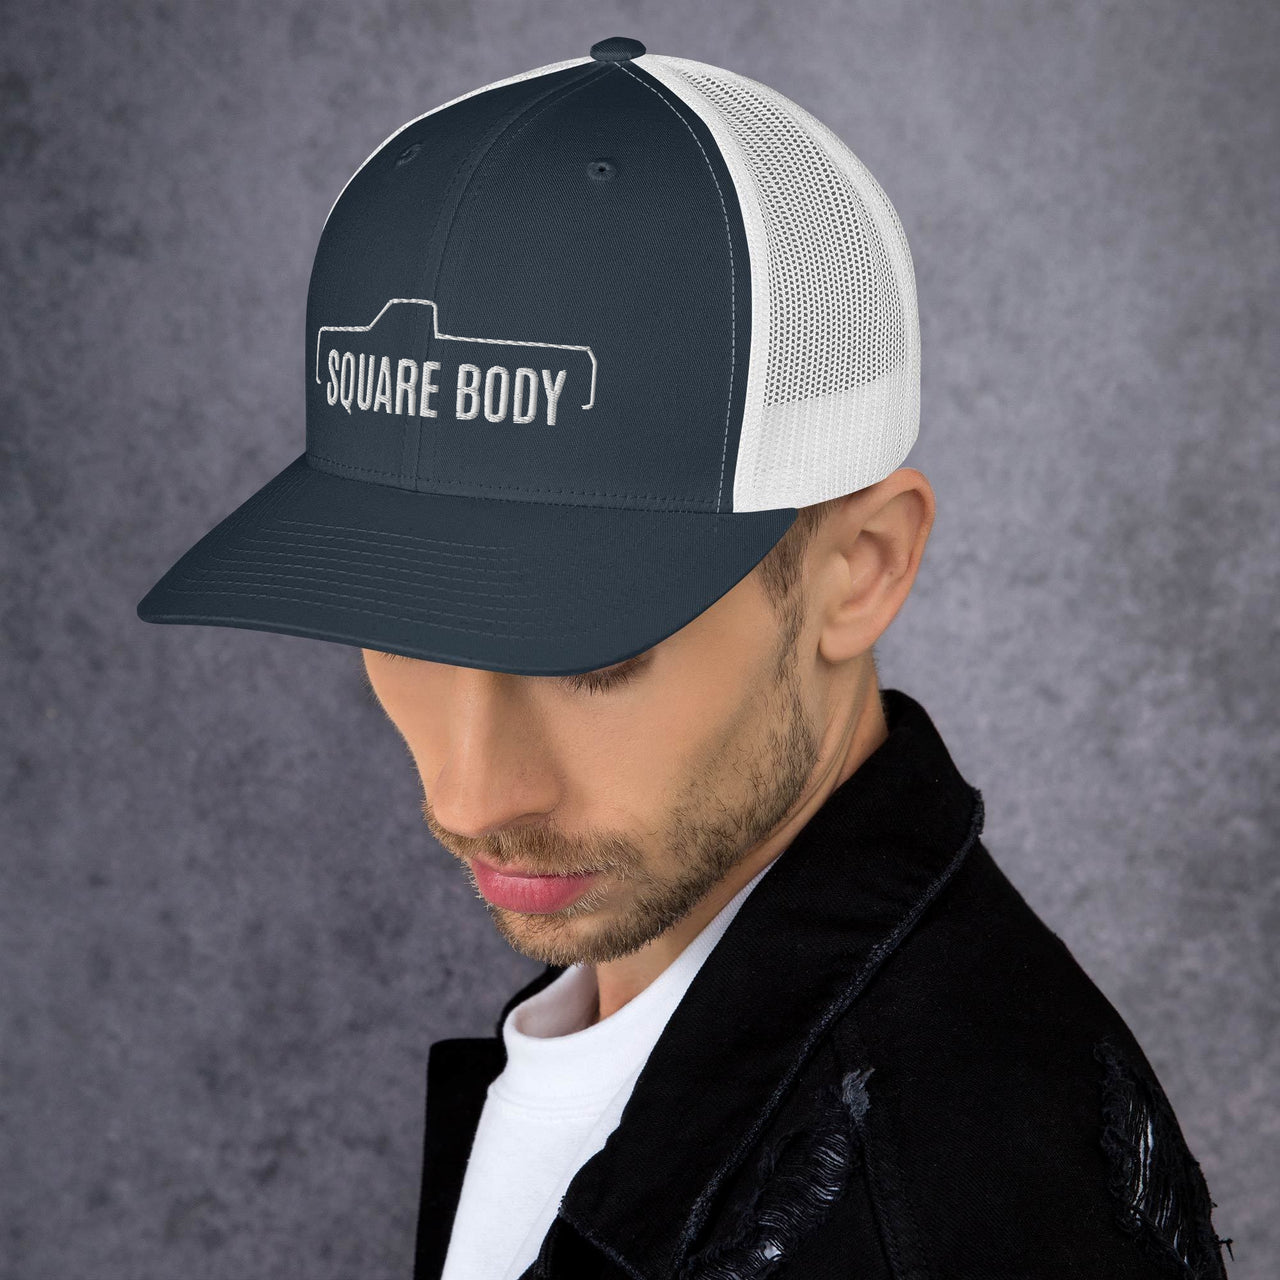 man wearing a Square body c10 k10 trucker hat from aggressive thread in navy and white